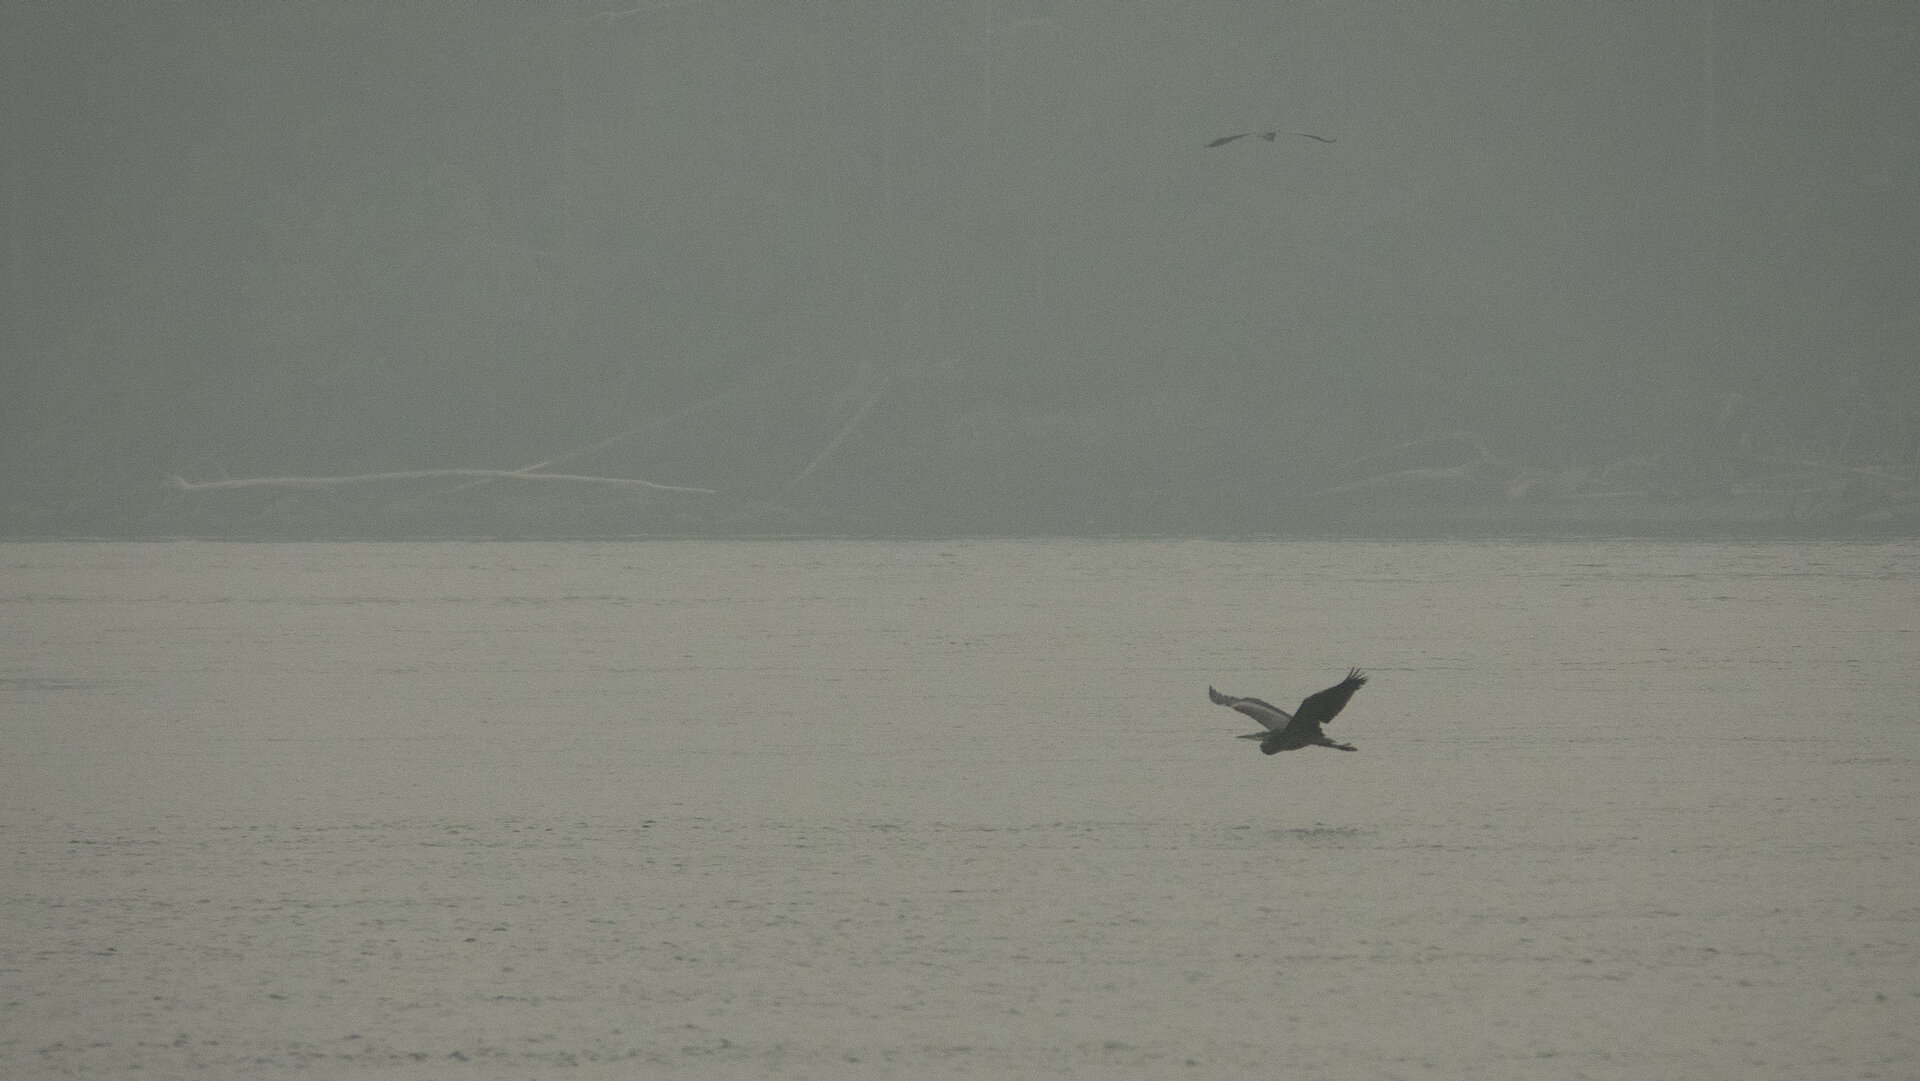  A heron flying over Active Pass. The smoke was so bad that even in here where it’s protected, you could barely see across the narrow channel. 